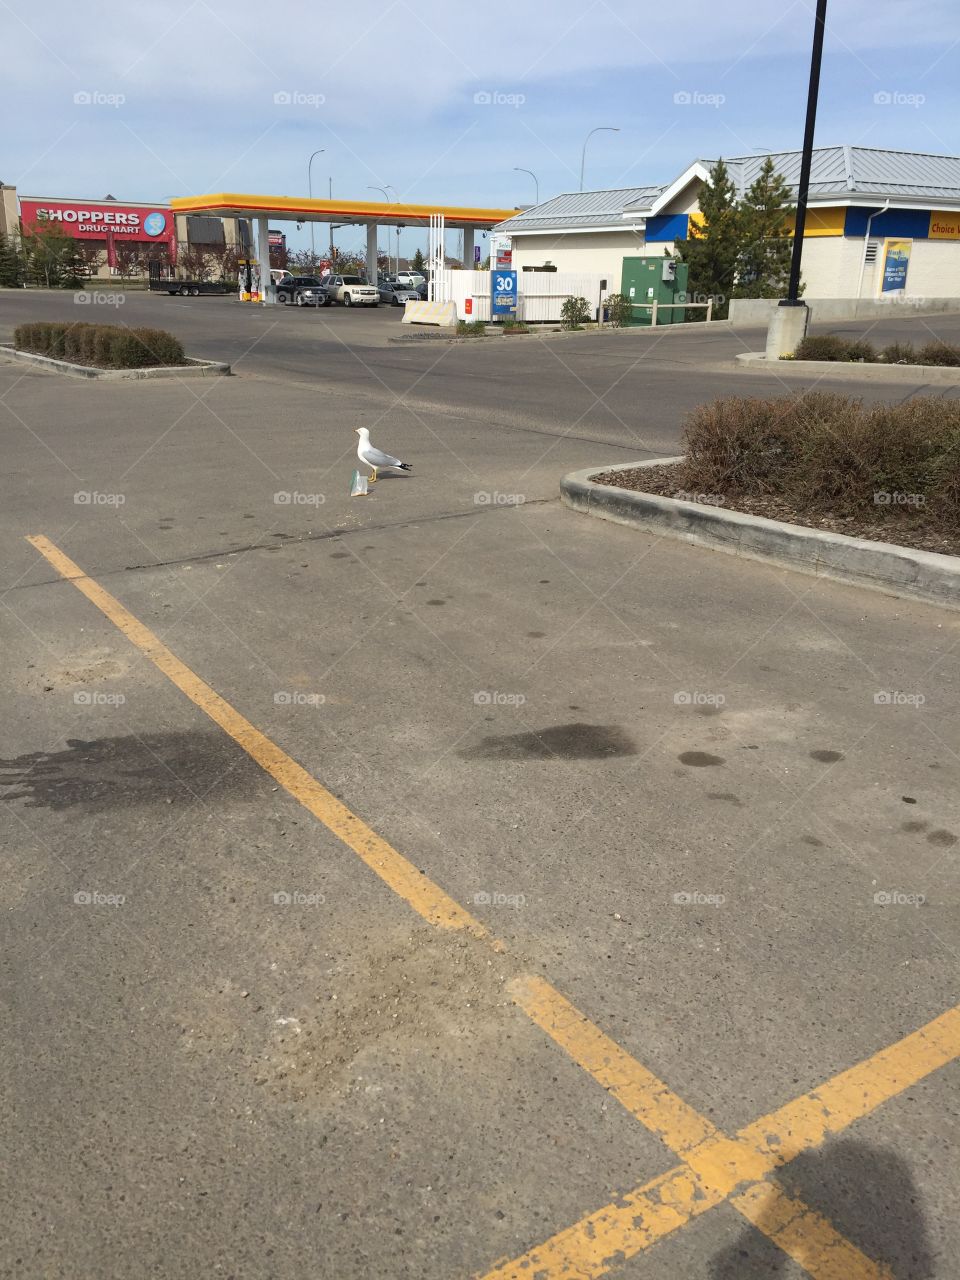 Seagull in the parking lot